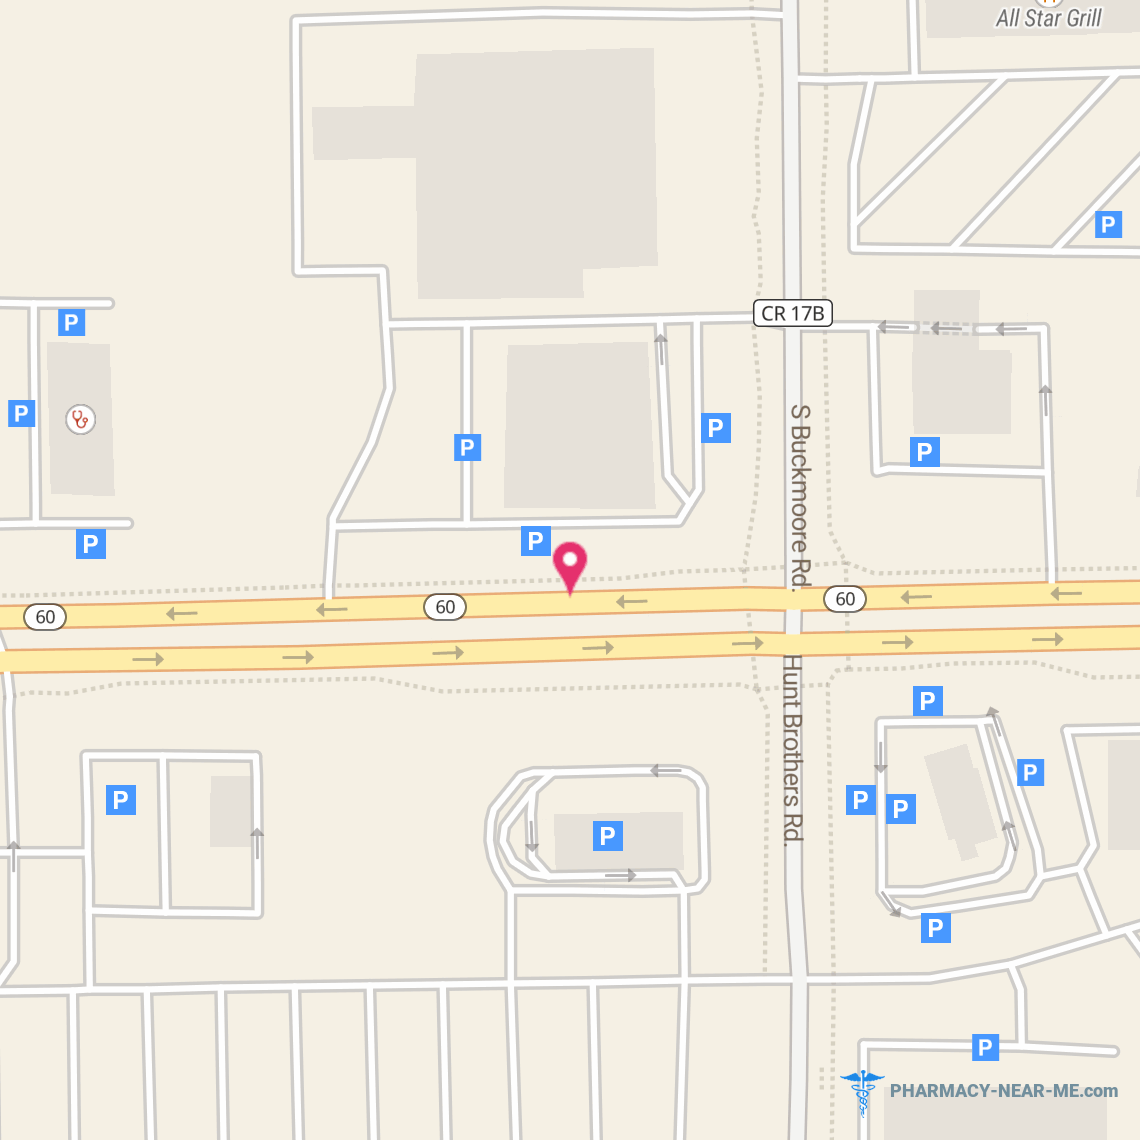 WALGREENS - Pharmacy Hours, Phone, Reviews & Information: 1903 State Road 60 East, Lake Wales, Florida 33853, United States